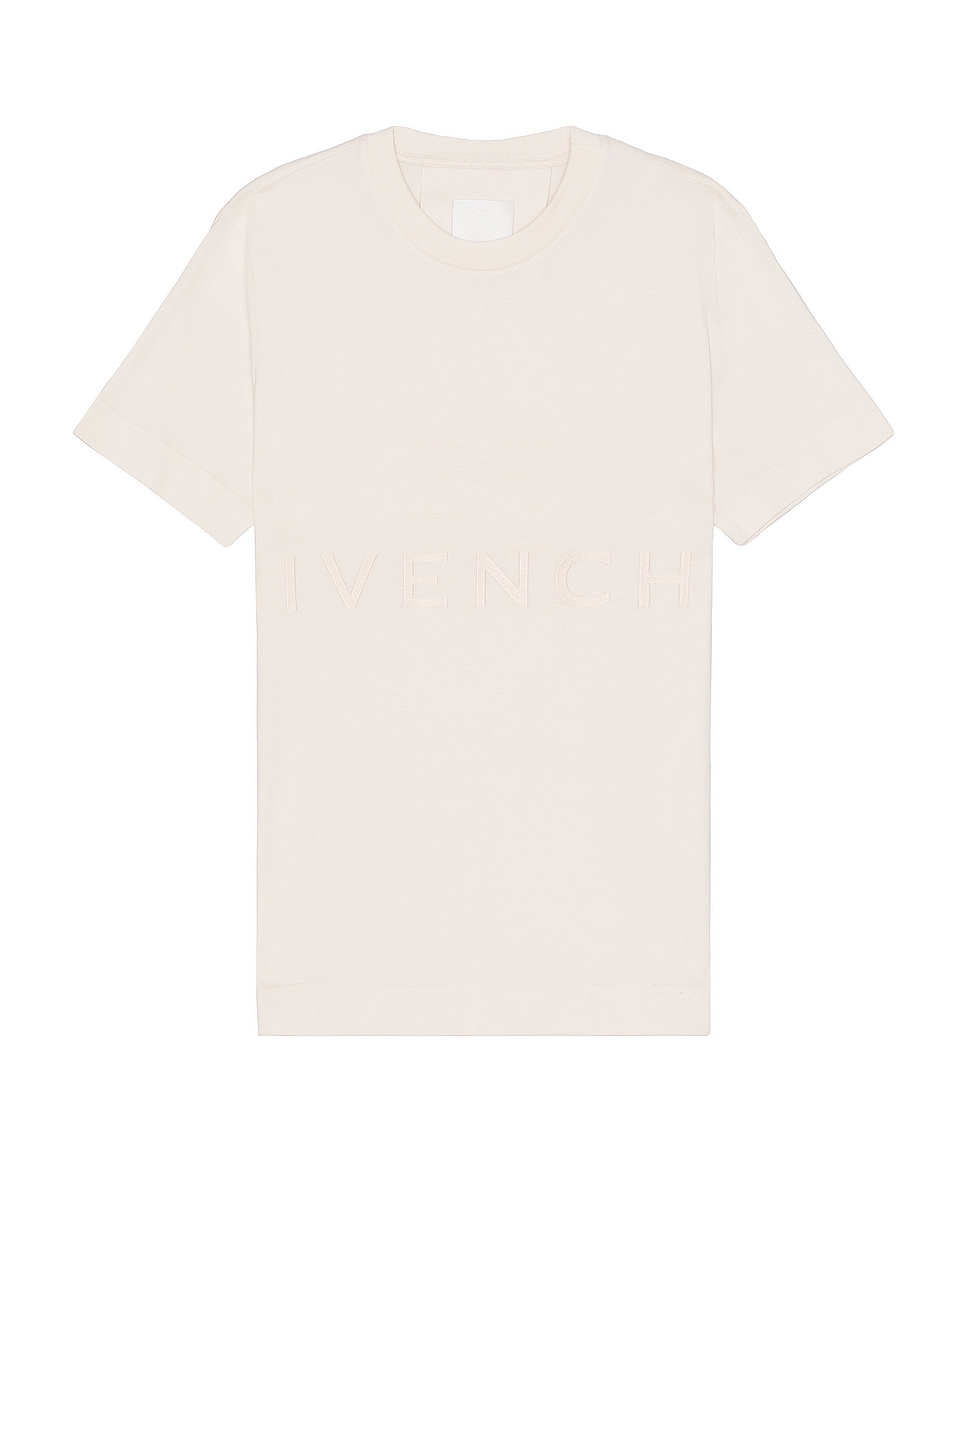 Image 1 of Givenchy Slim Fit Branding Embroidery Tee in Nude Pink